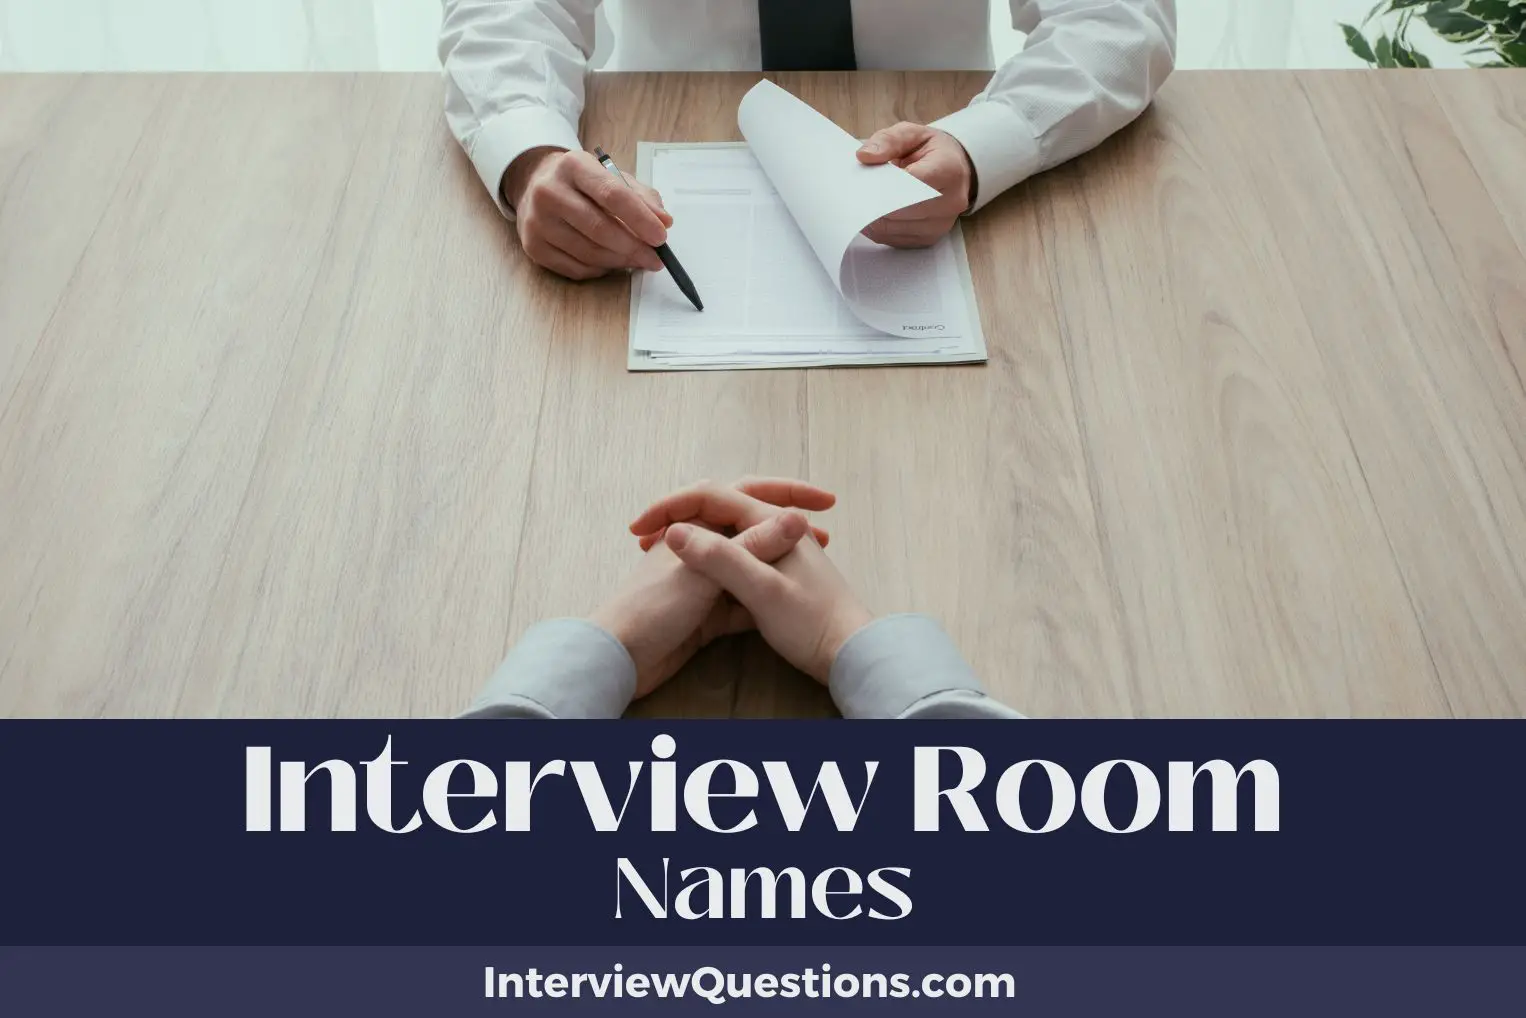 Interview Room Names